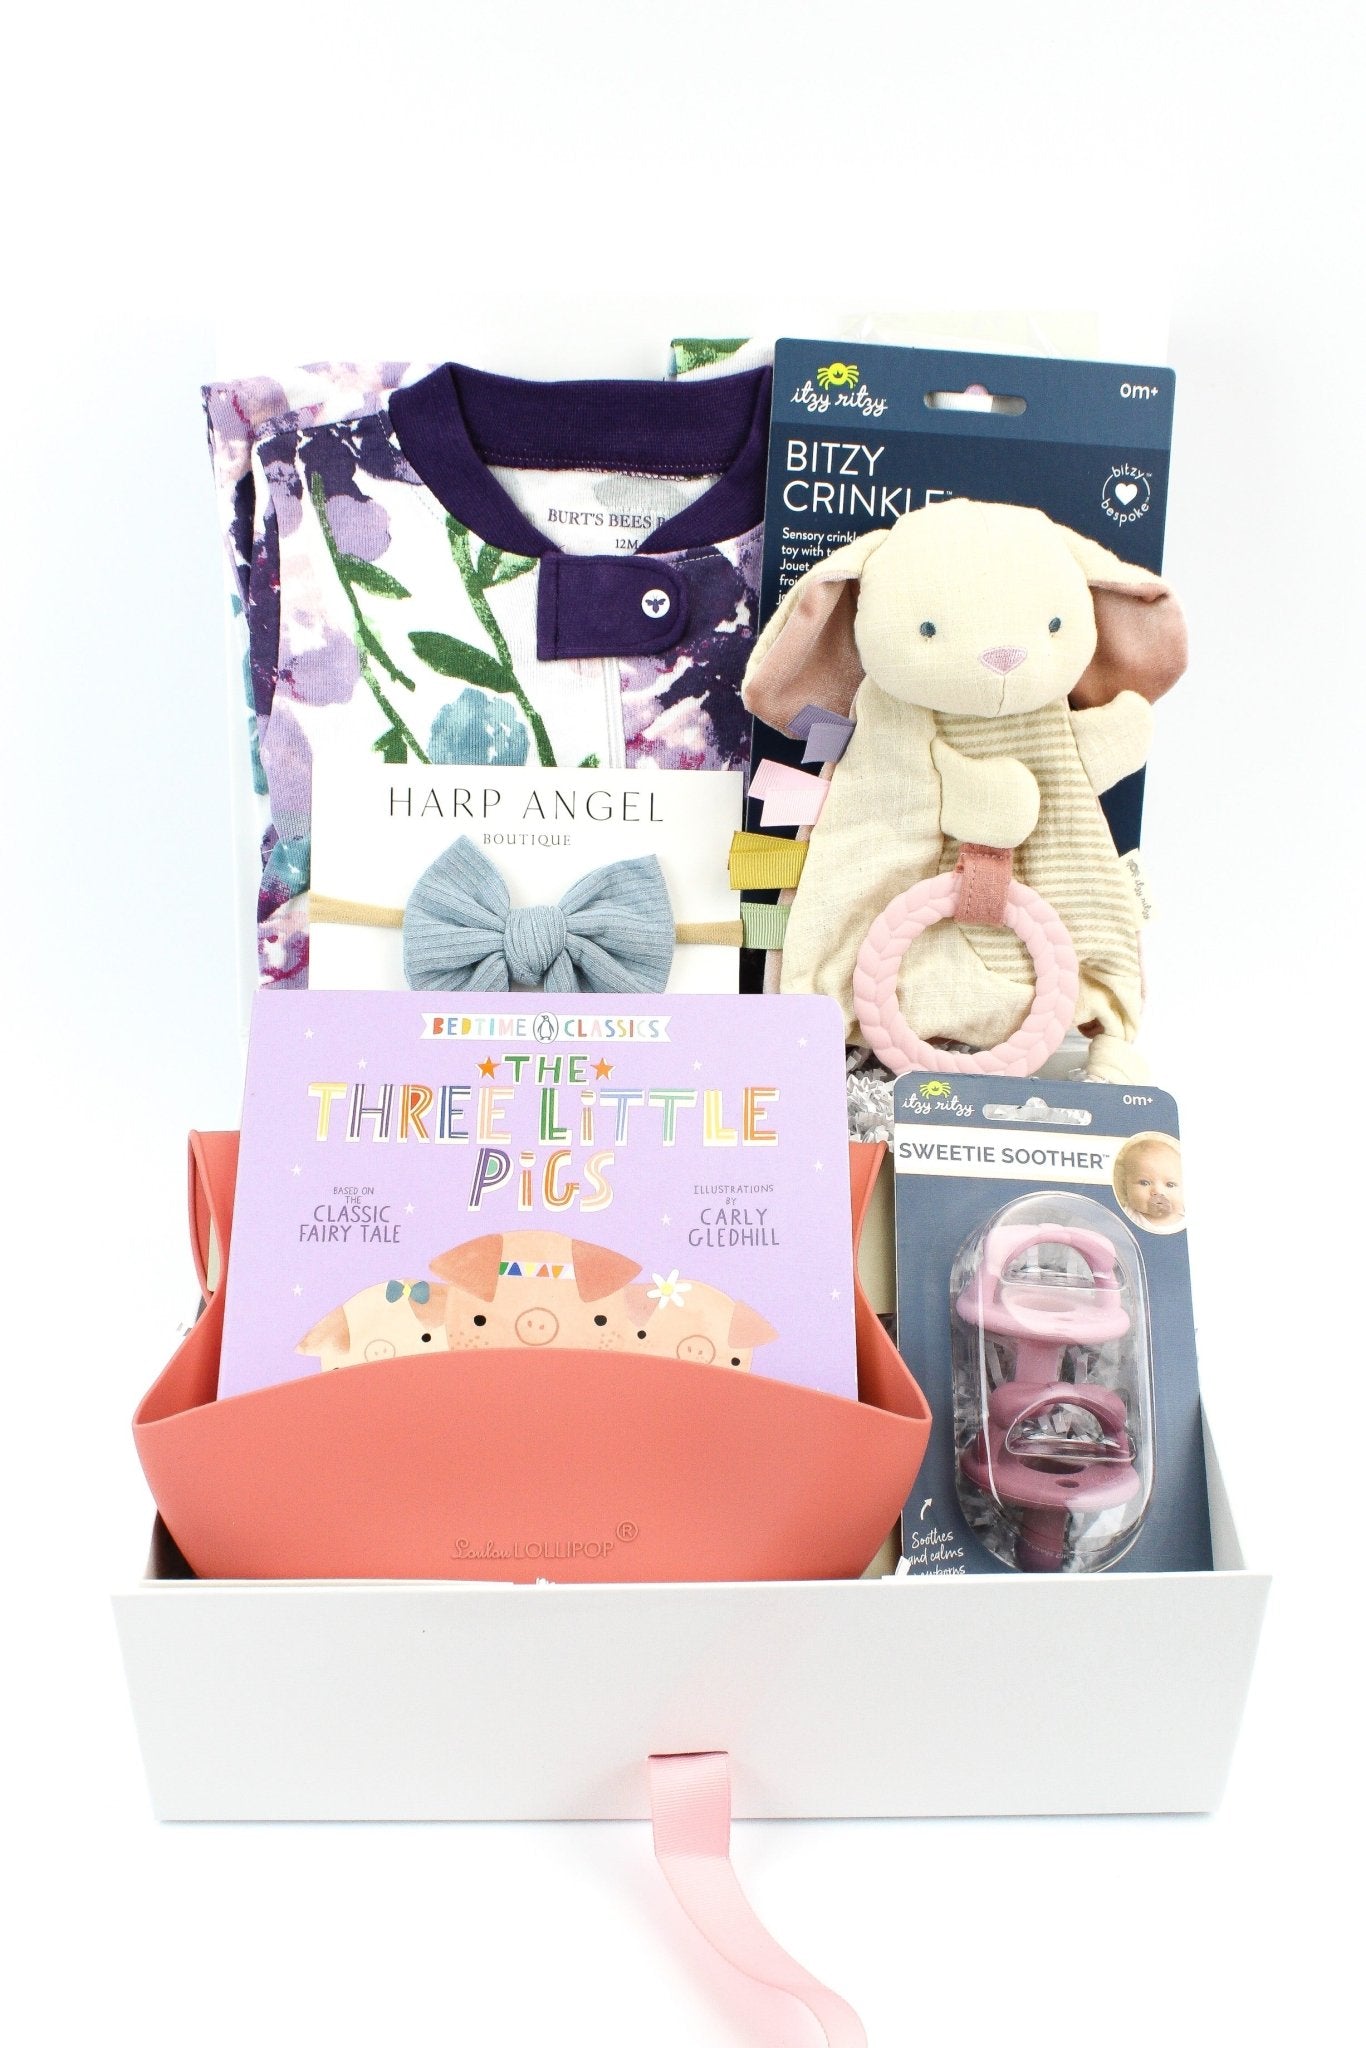 New Baby Girl Gift Box Gift Box in Culpeper, VA - ENDLESS CREATIONS FLOWERS  AND GIFTS